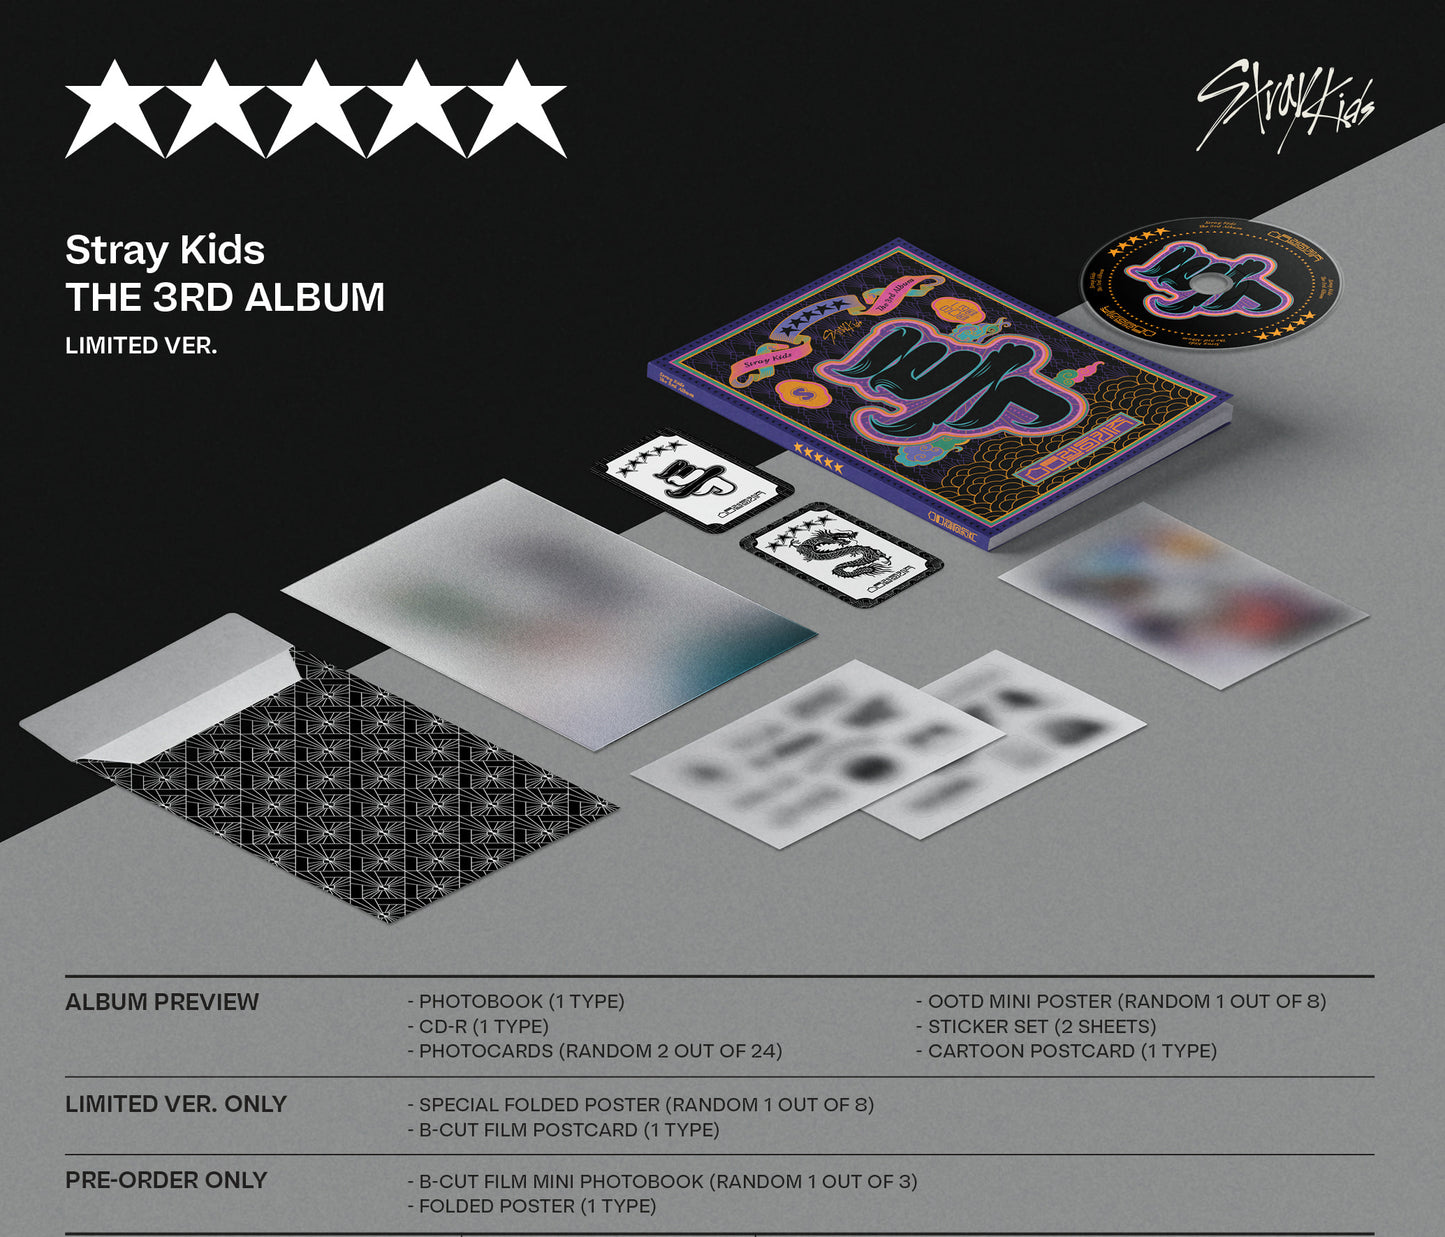 Stray Kids The 3rd Album ★★★★★ (5-STAR) (LIMITED VER.)